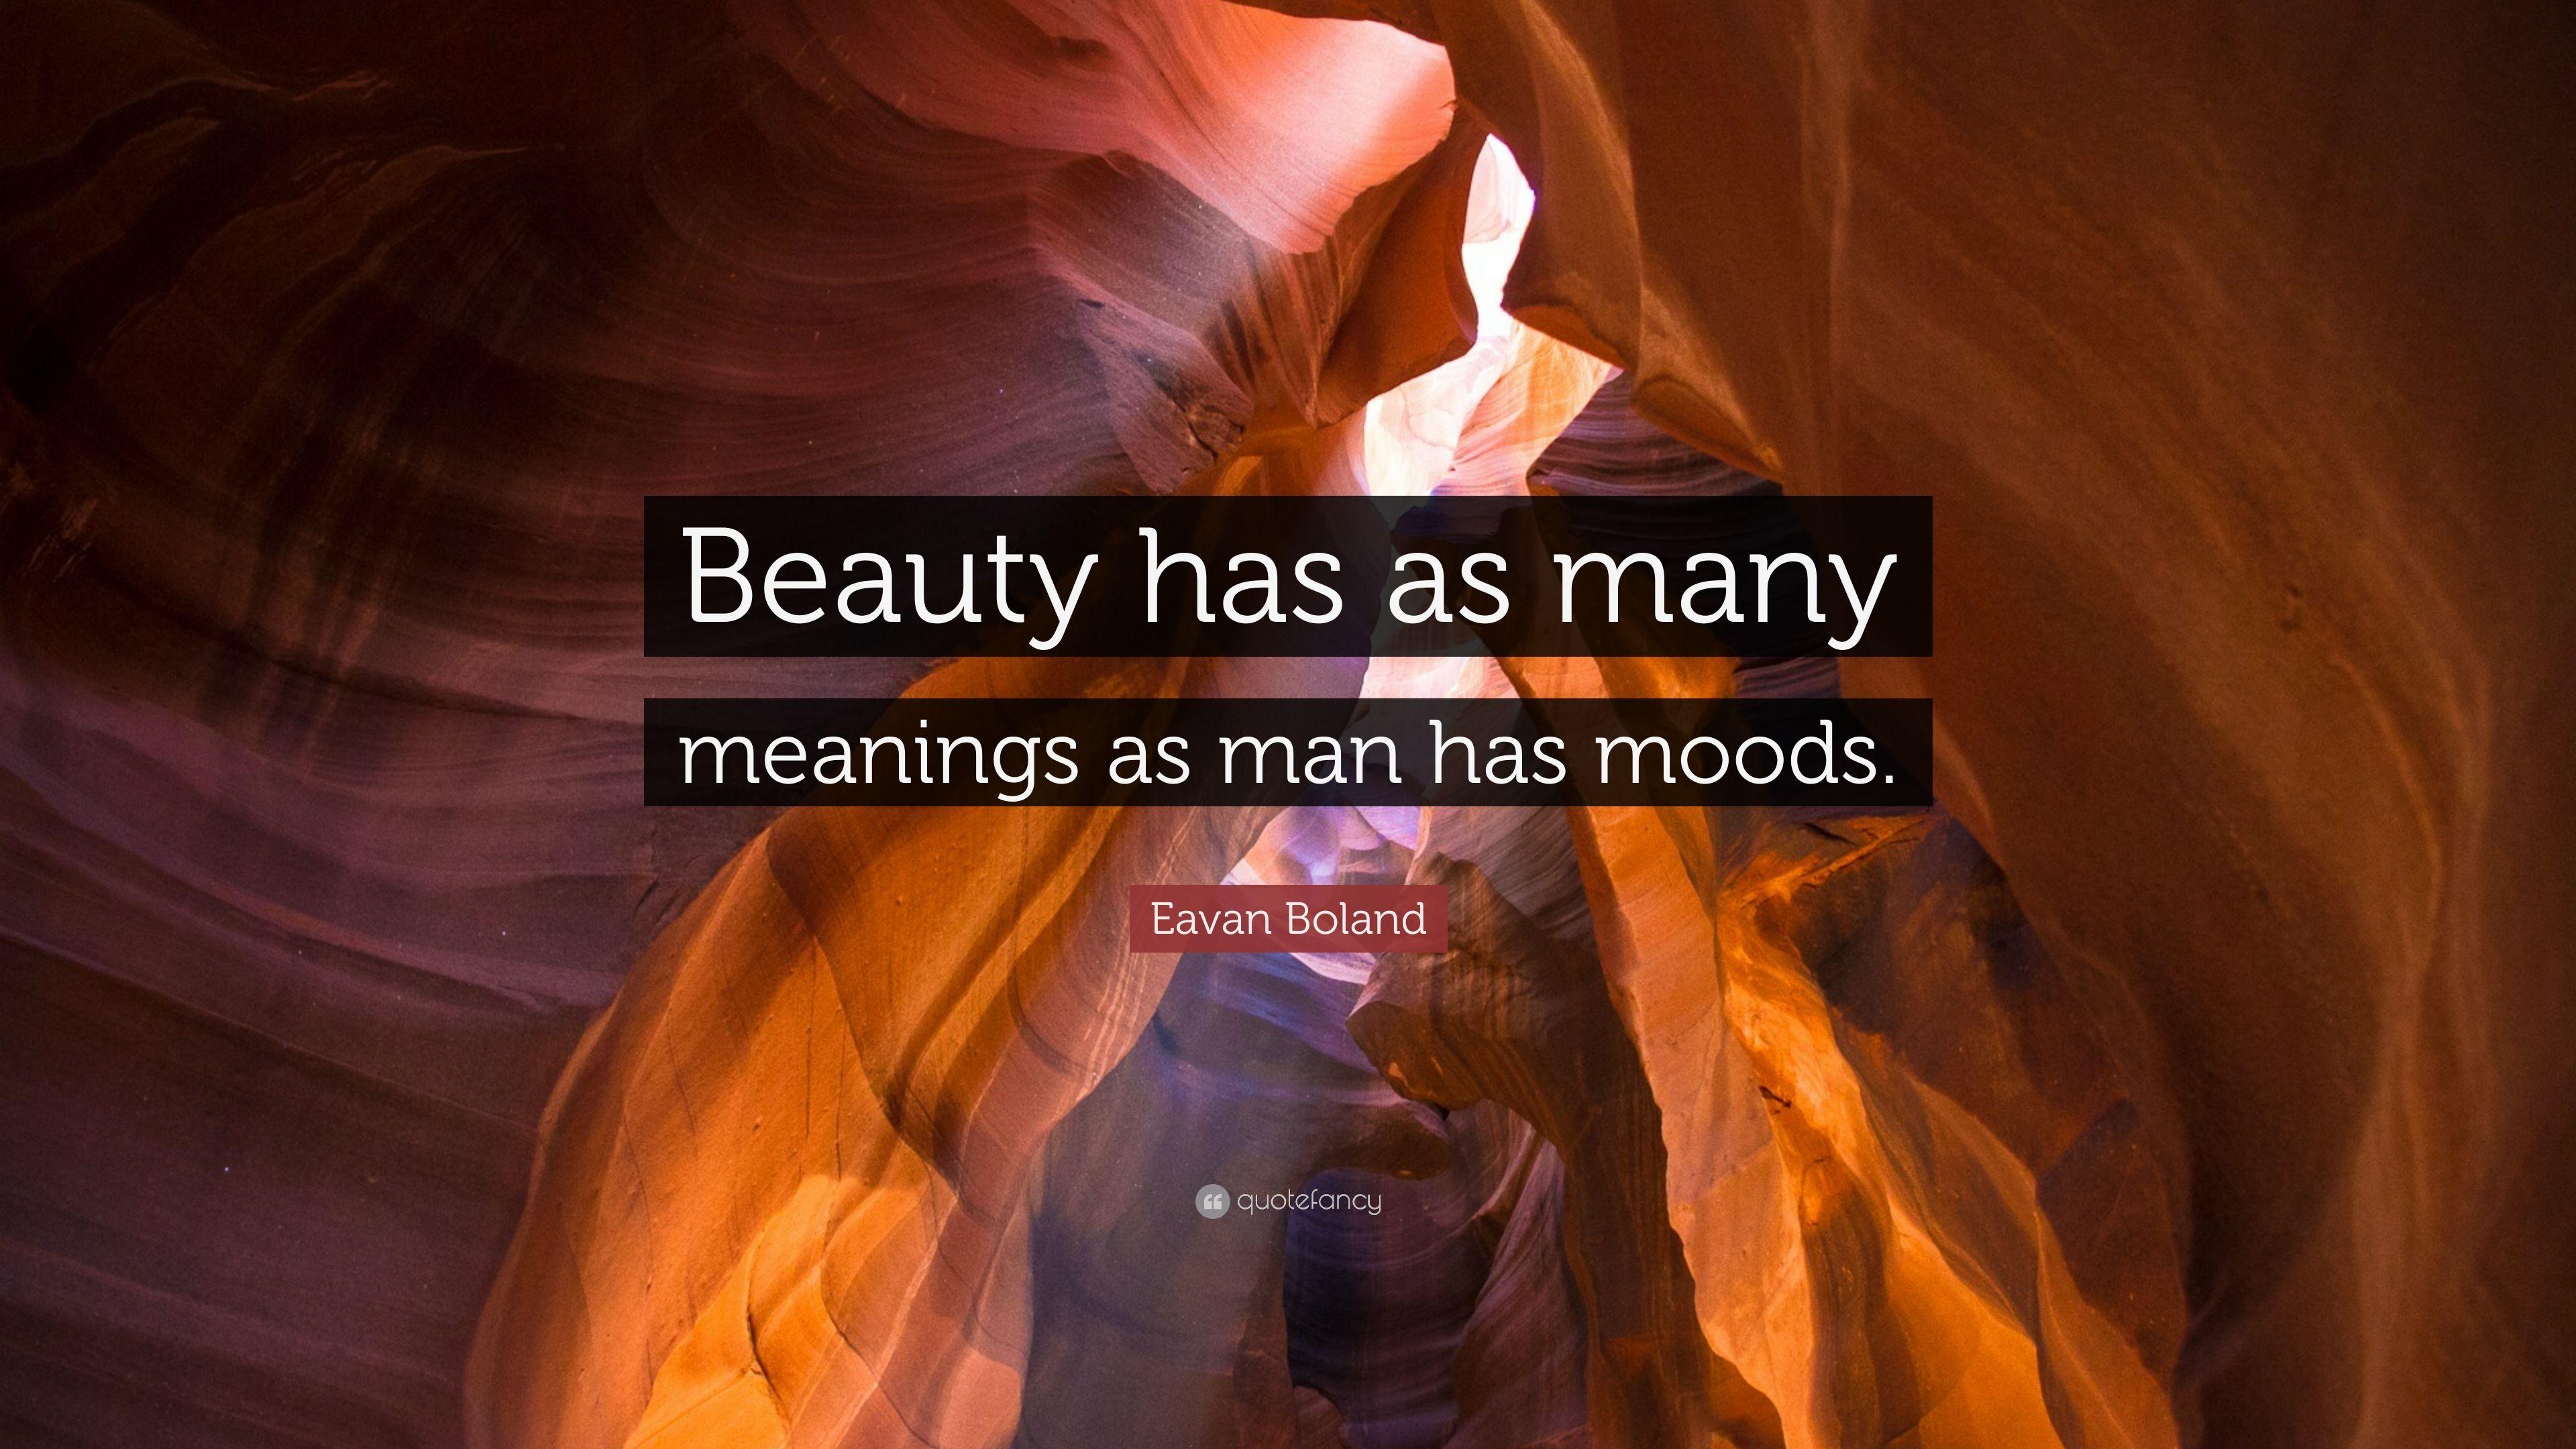 Eavan Boland Quote: “Beauty has as many meanings as man has moods